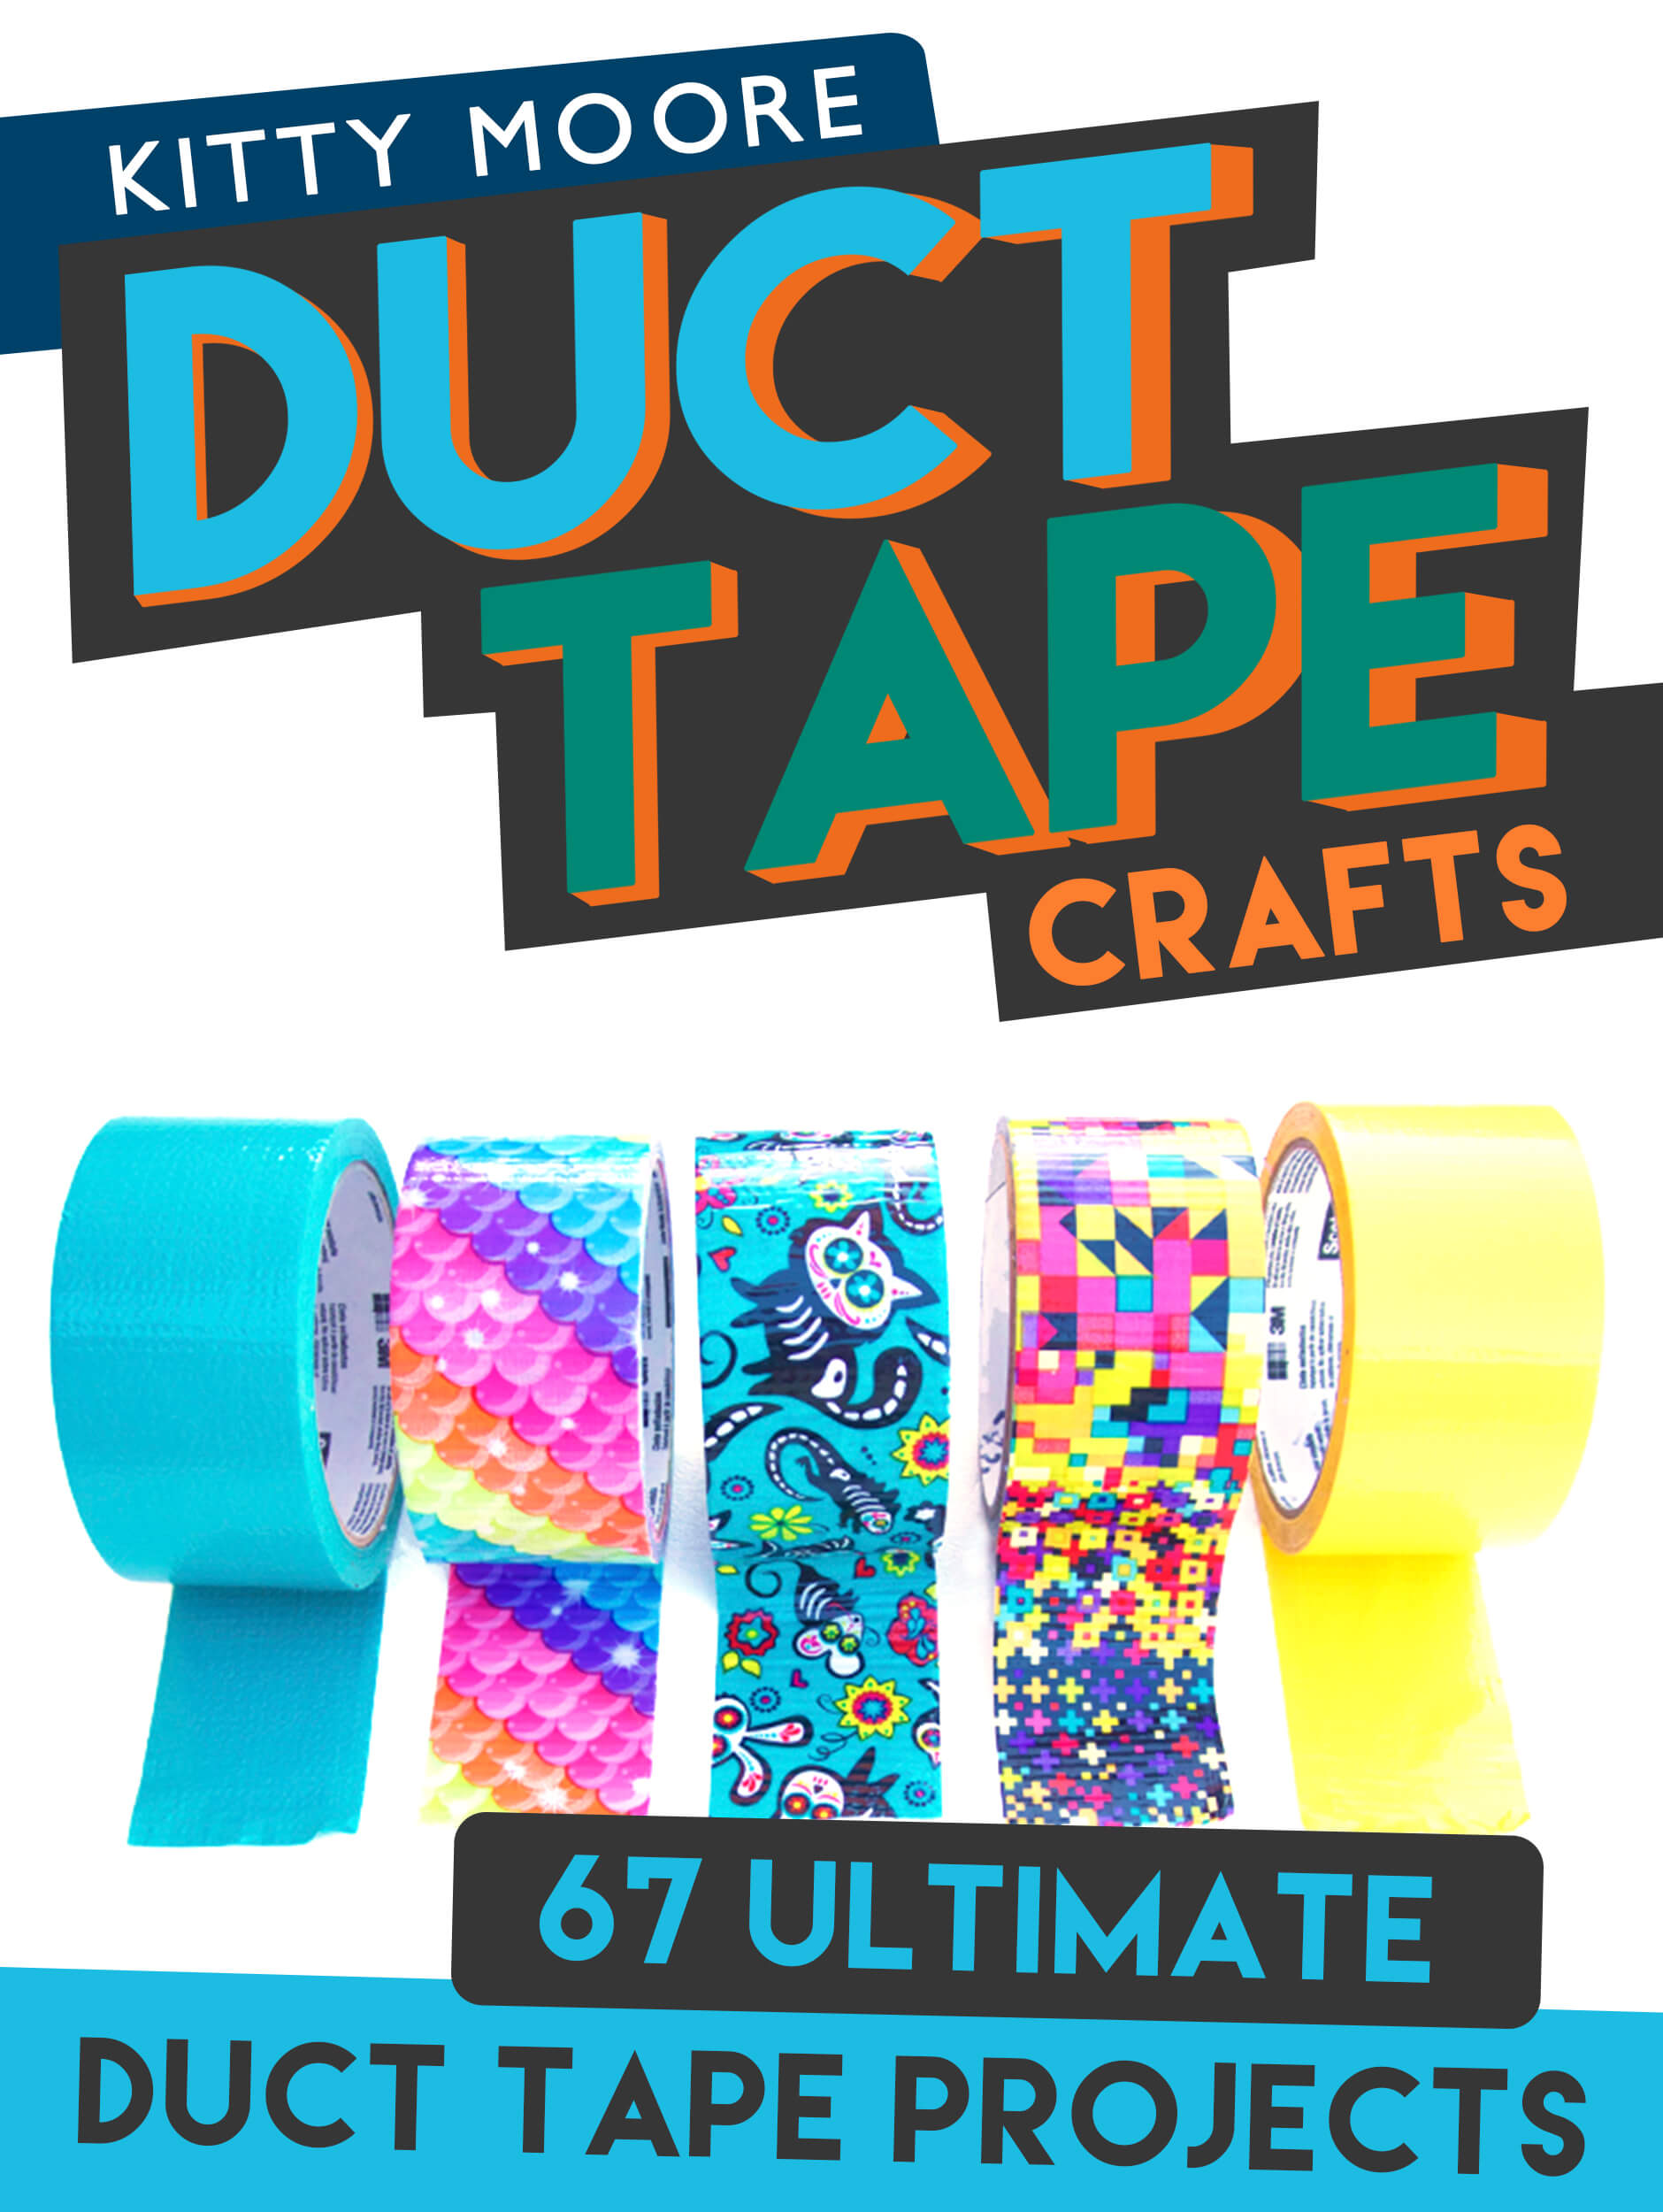 FREE: Duct Tape Crafts (3rd Edition): 67 Ultimate Duct Tape Crafts – For Purses, Wallets & Much More! by Kitty Moore